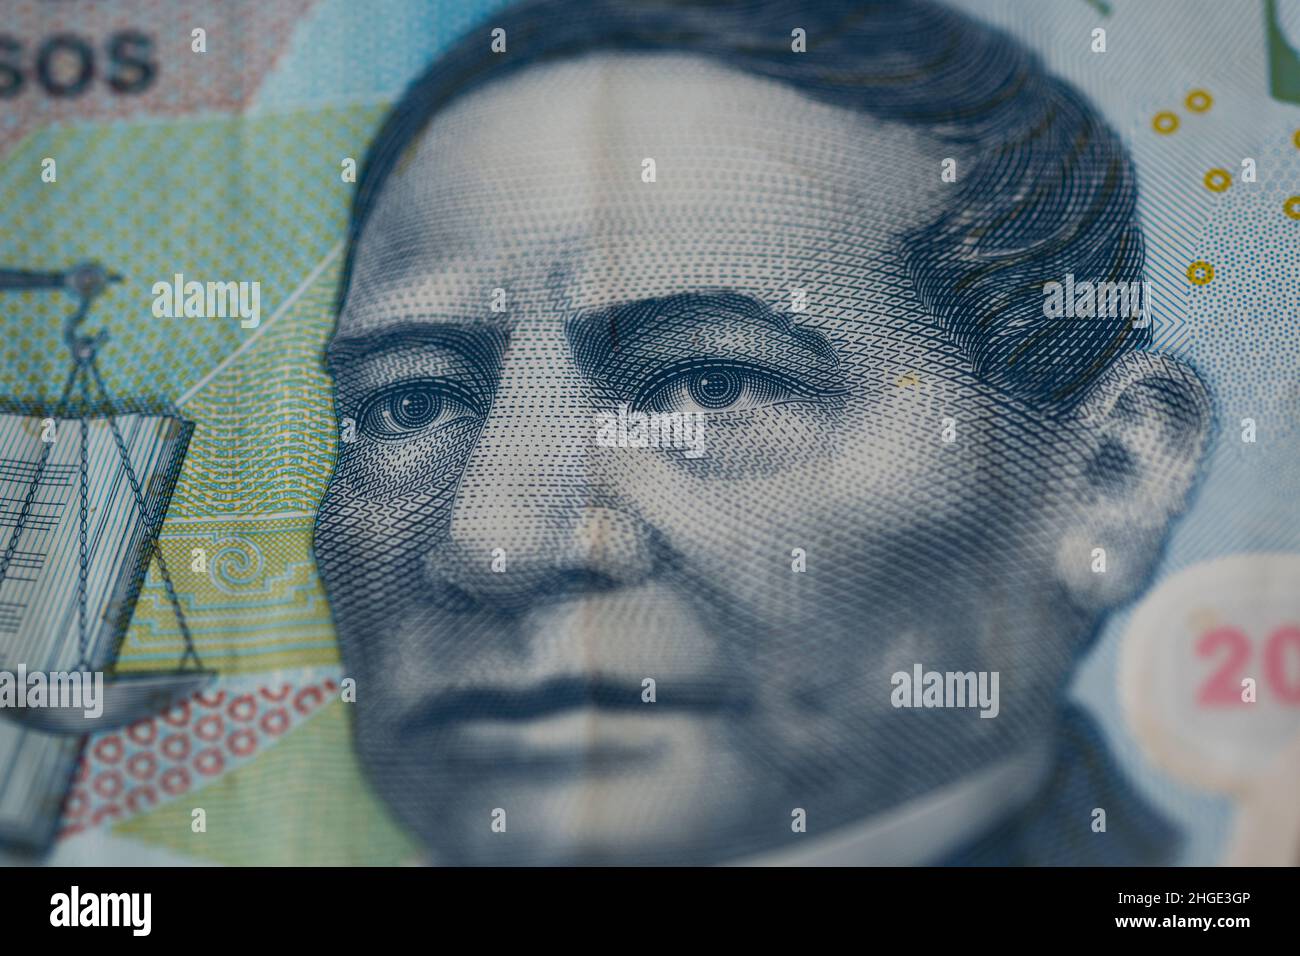 Rheinbach, Germany  12 April 2021,  Macro shot of the face of 'Benito Juarez' on a Mexican 20 peso note Stock Photo